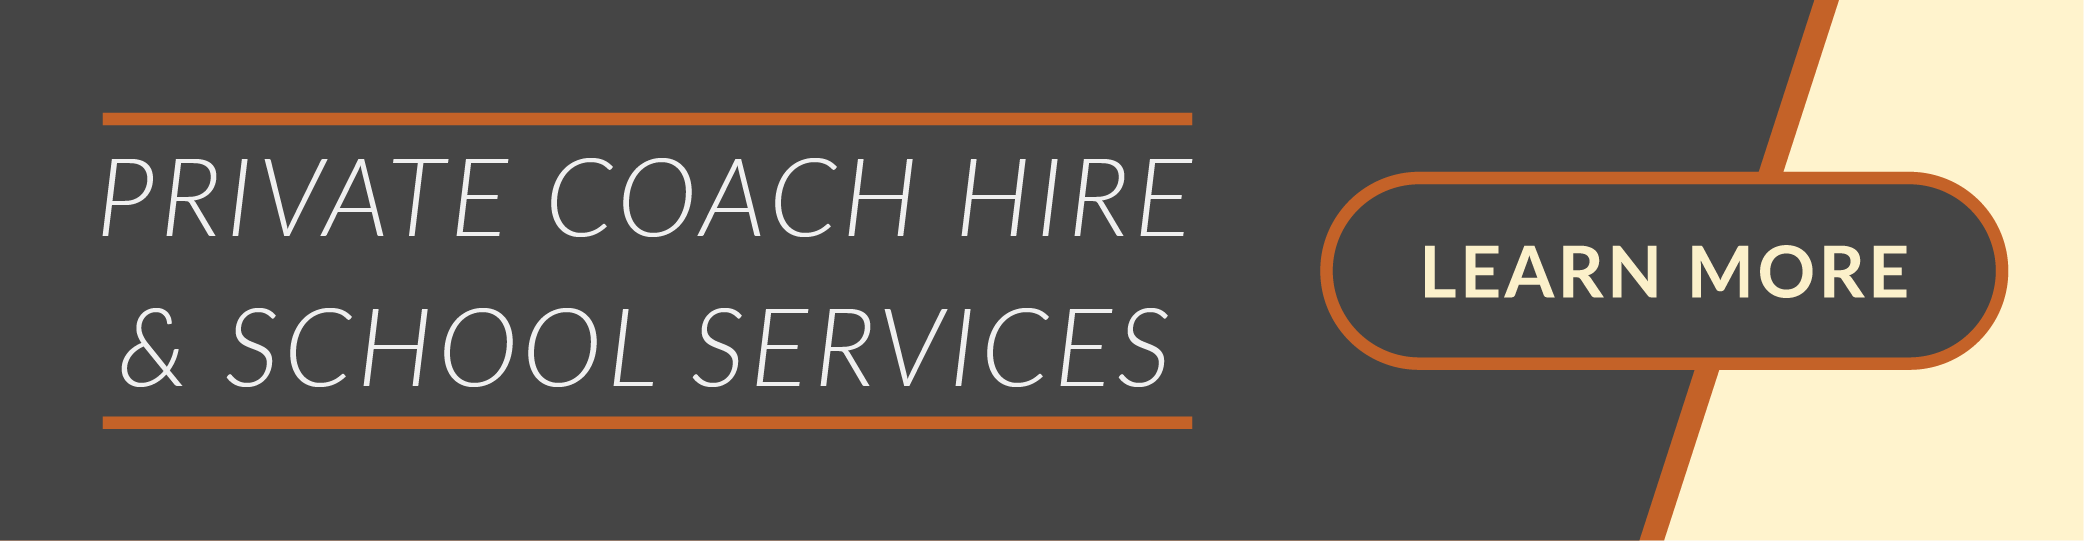 Eve Coaches: Click to learn more about our private coach hire and school services.